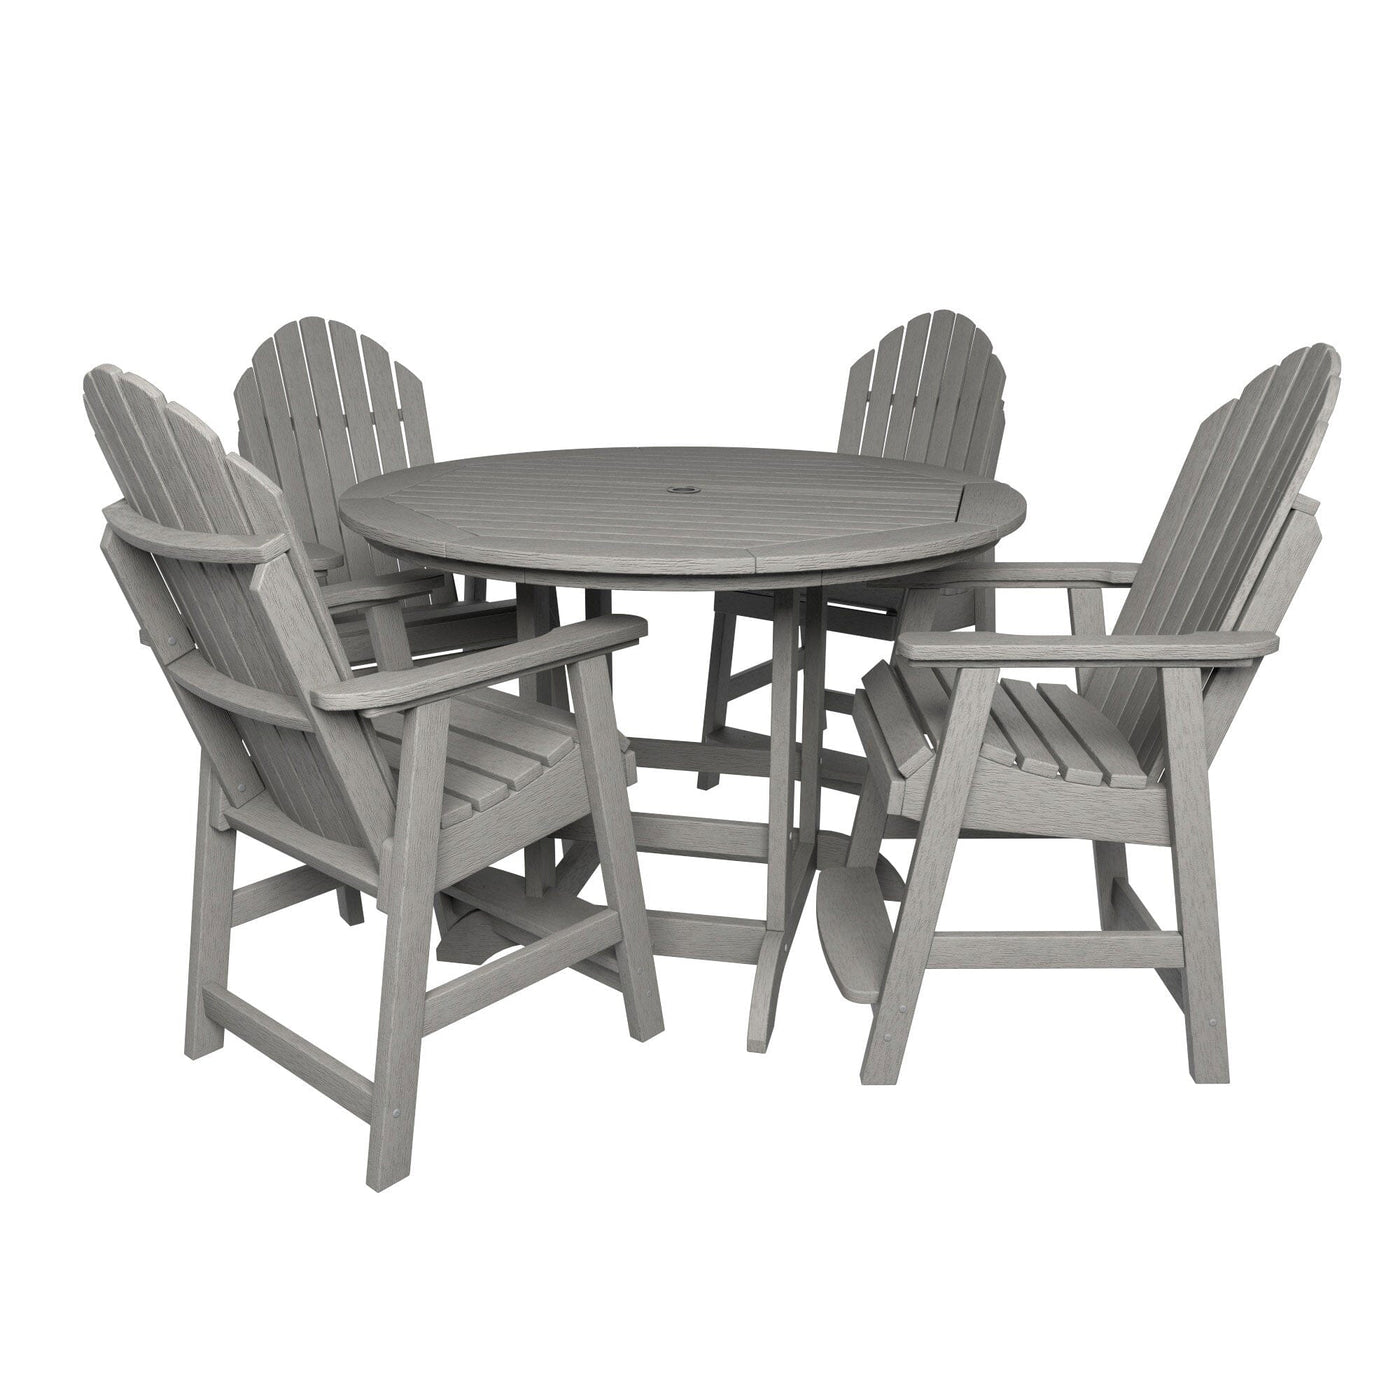 Hamilton 5pc 48in Round Dining Set - Counter Height Dining Highwood USA Harbor Gray 